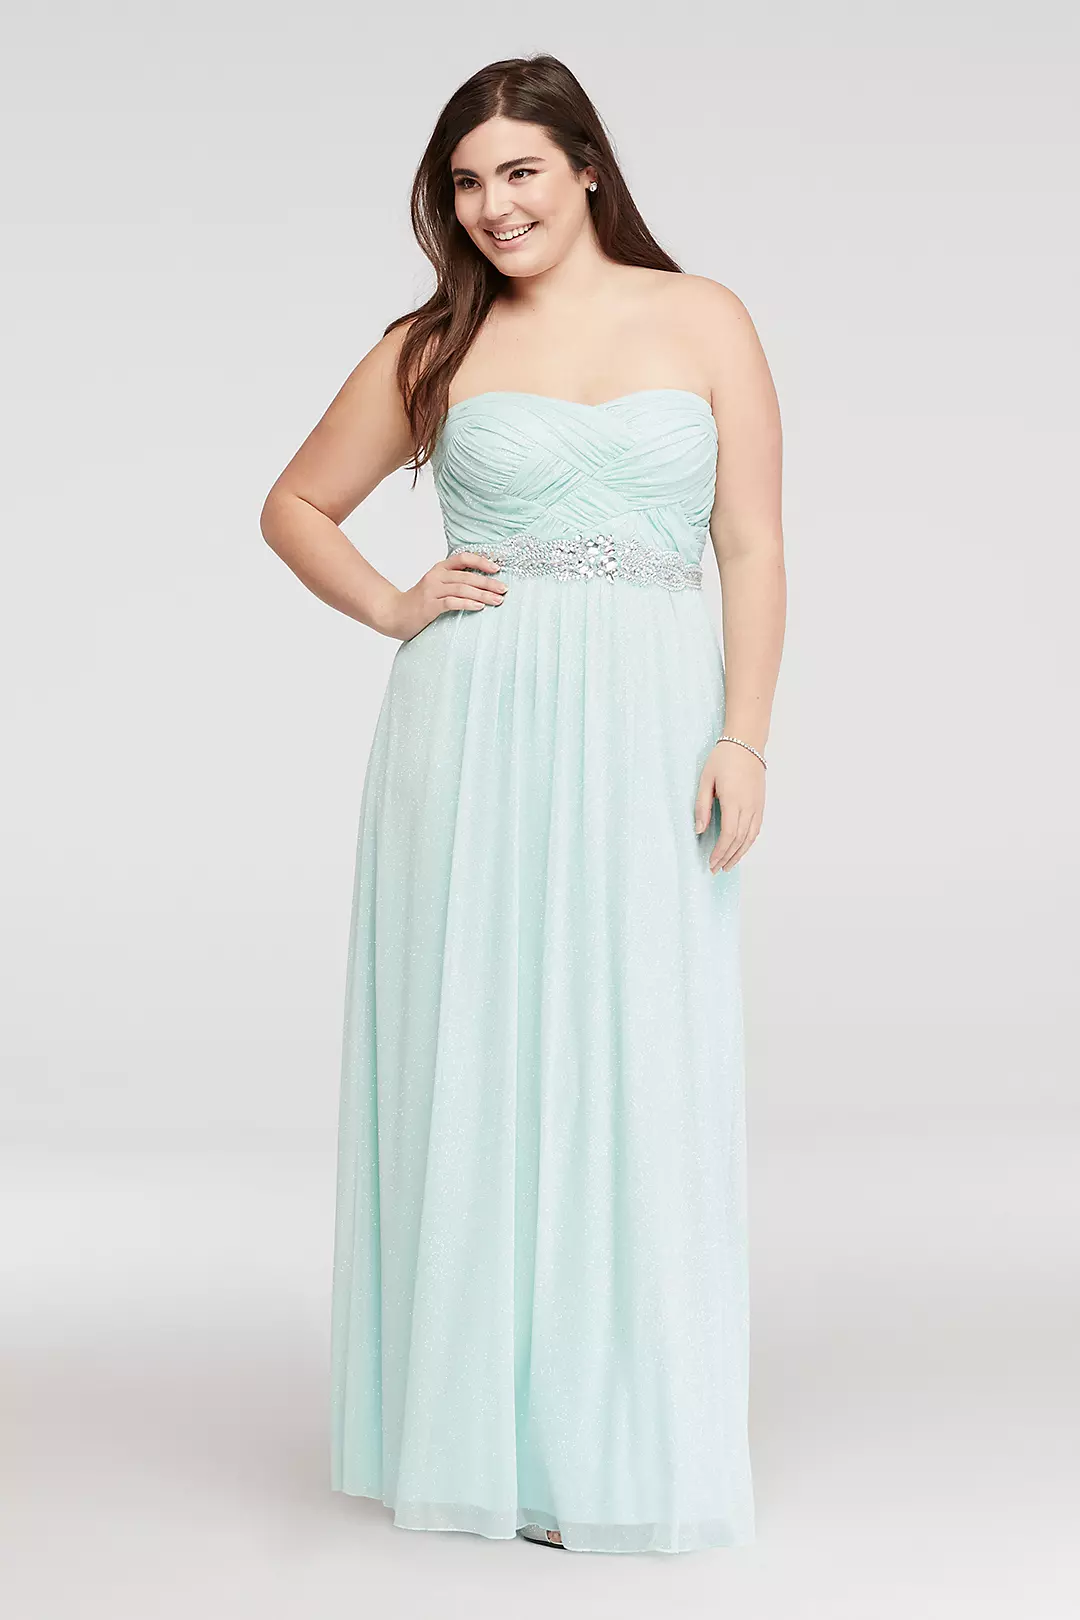 Strapless Glitter Prom Dress with Basket  Detail Image